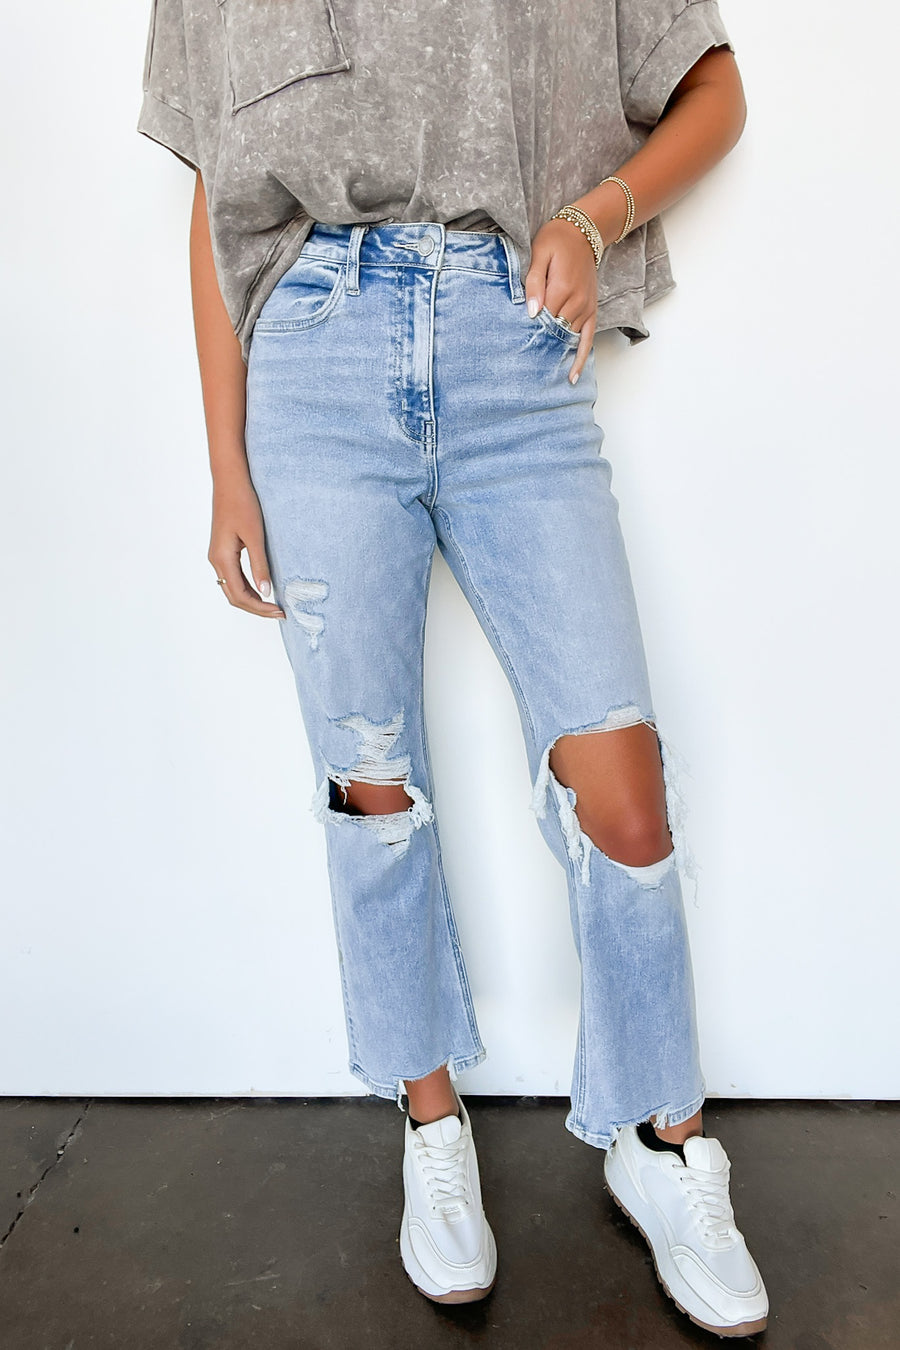 24 / Light Maileana 90's Super High Rise Distressed Straight Jeans - Madison and Mallory